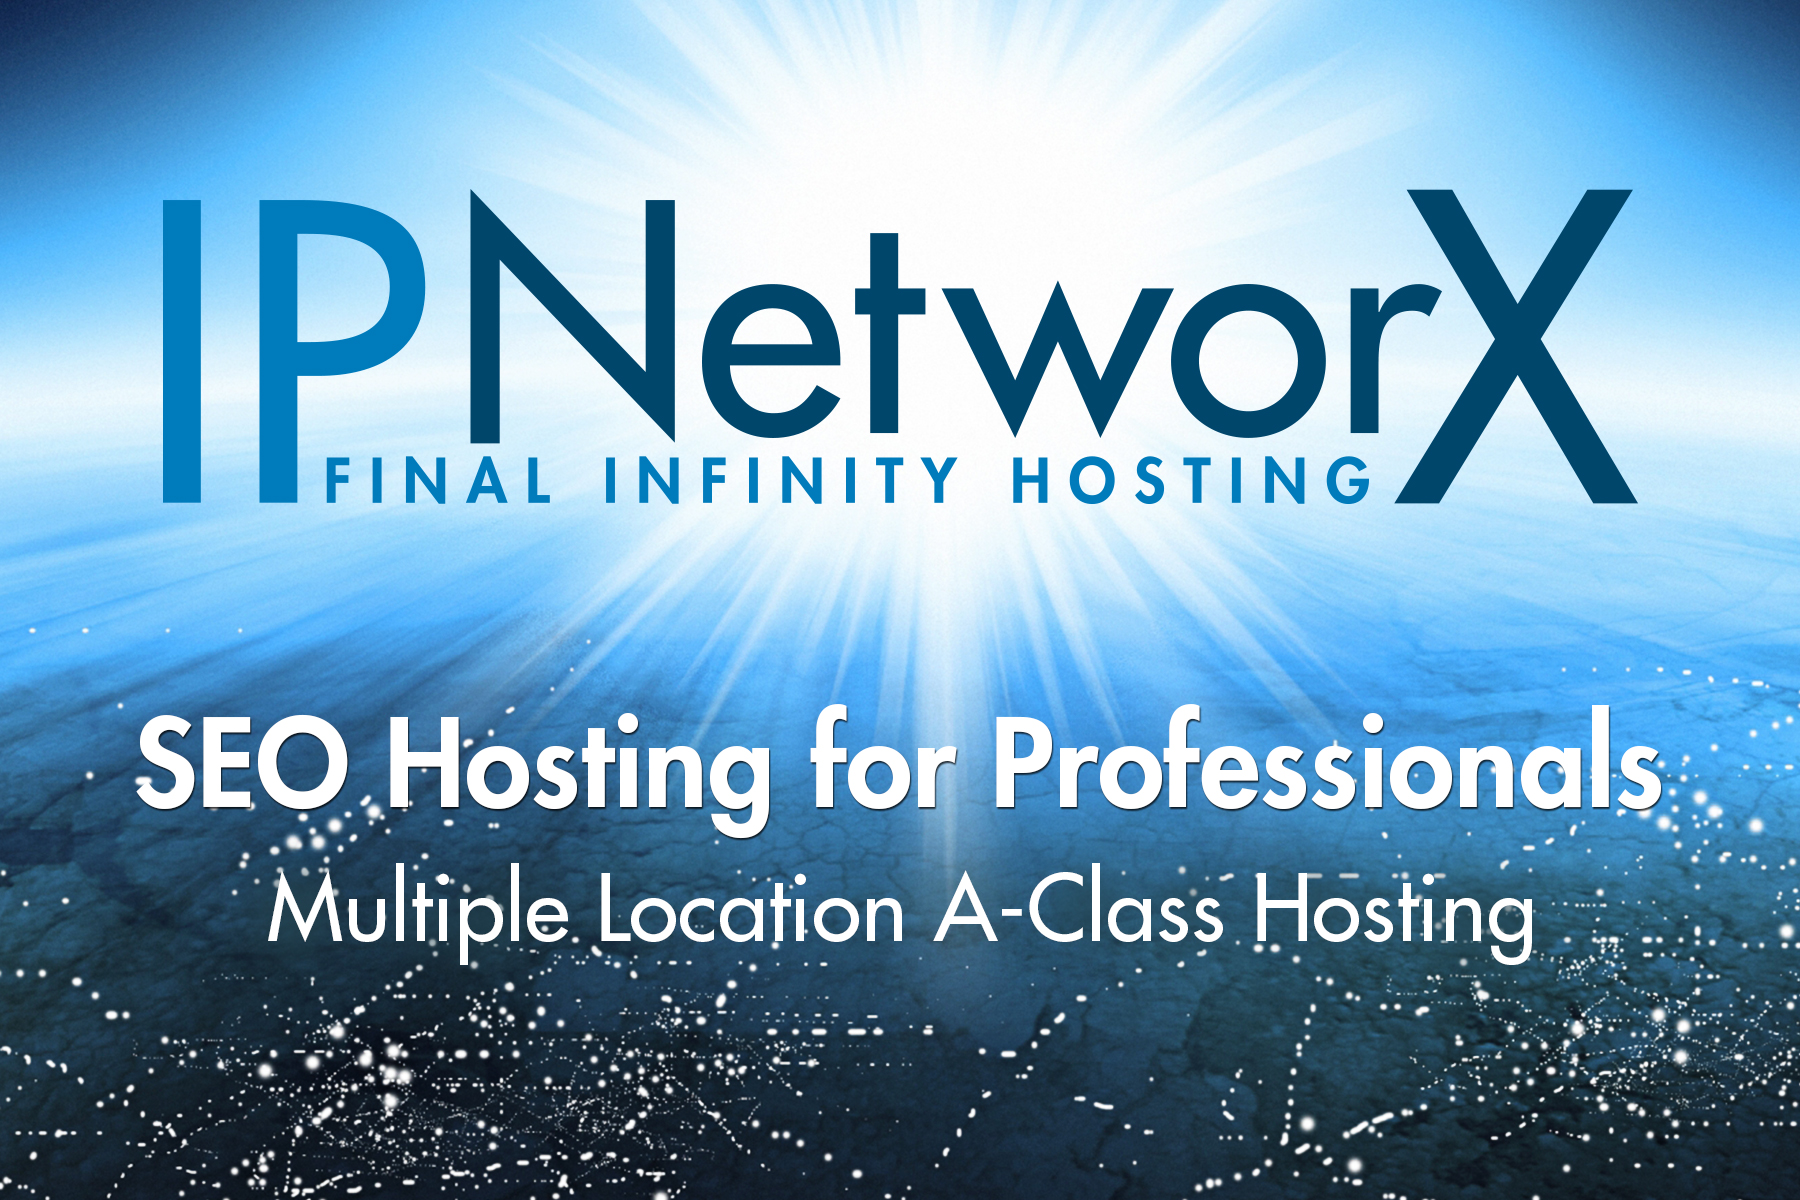 Multiple Location A-Class SEO Hosting - IP NetworX